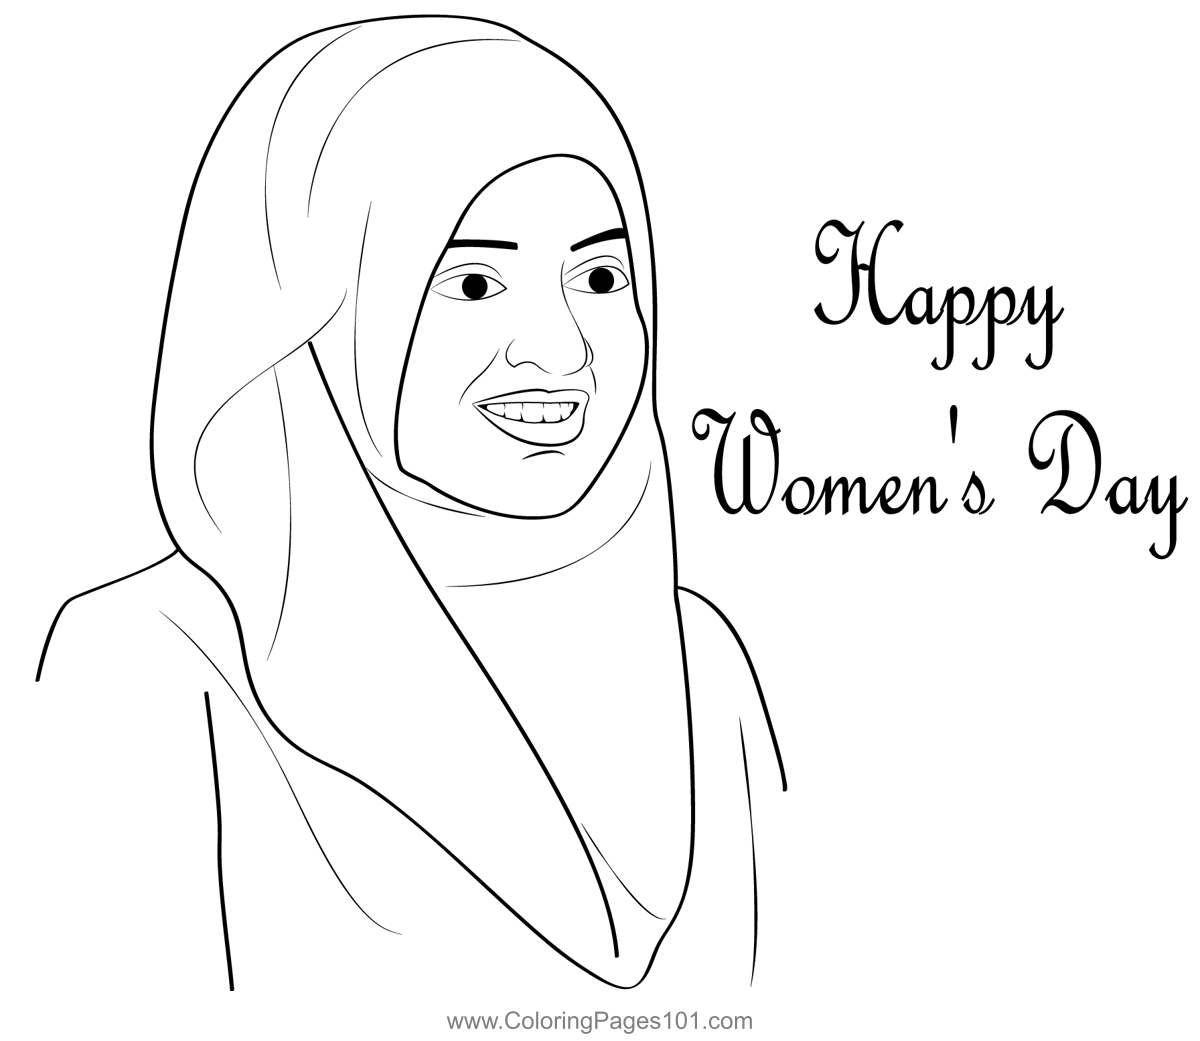 Celebrating Women Day Coloring Page for Kids - Free Women's Day Printable Coloring  Pages Online for Kids - ColoringPages101.com | Coloring Pages for Kids